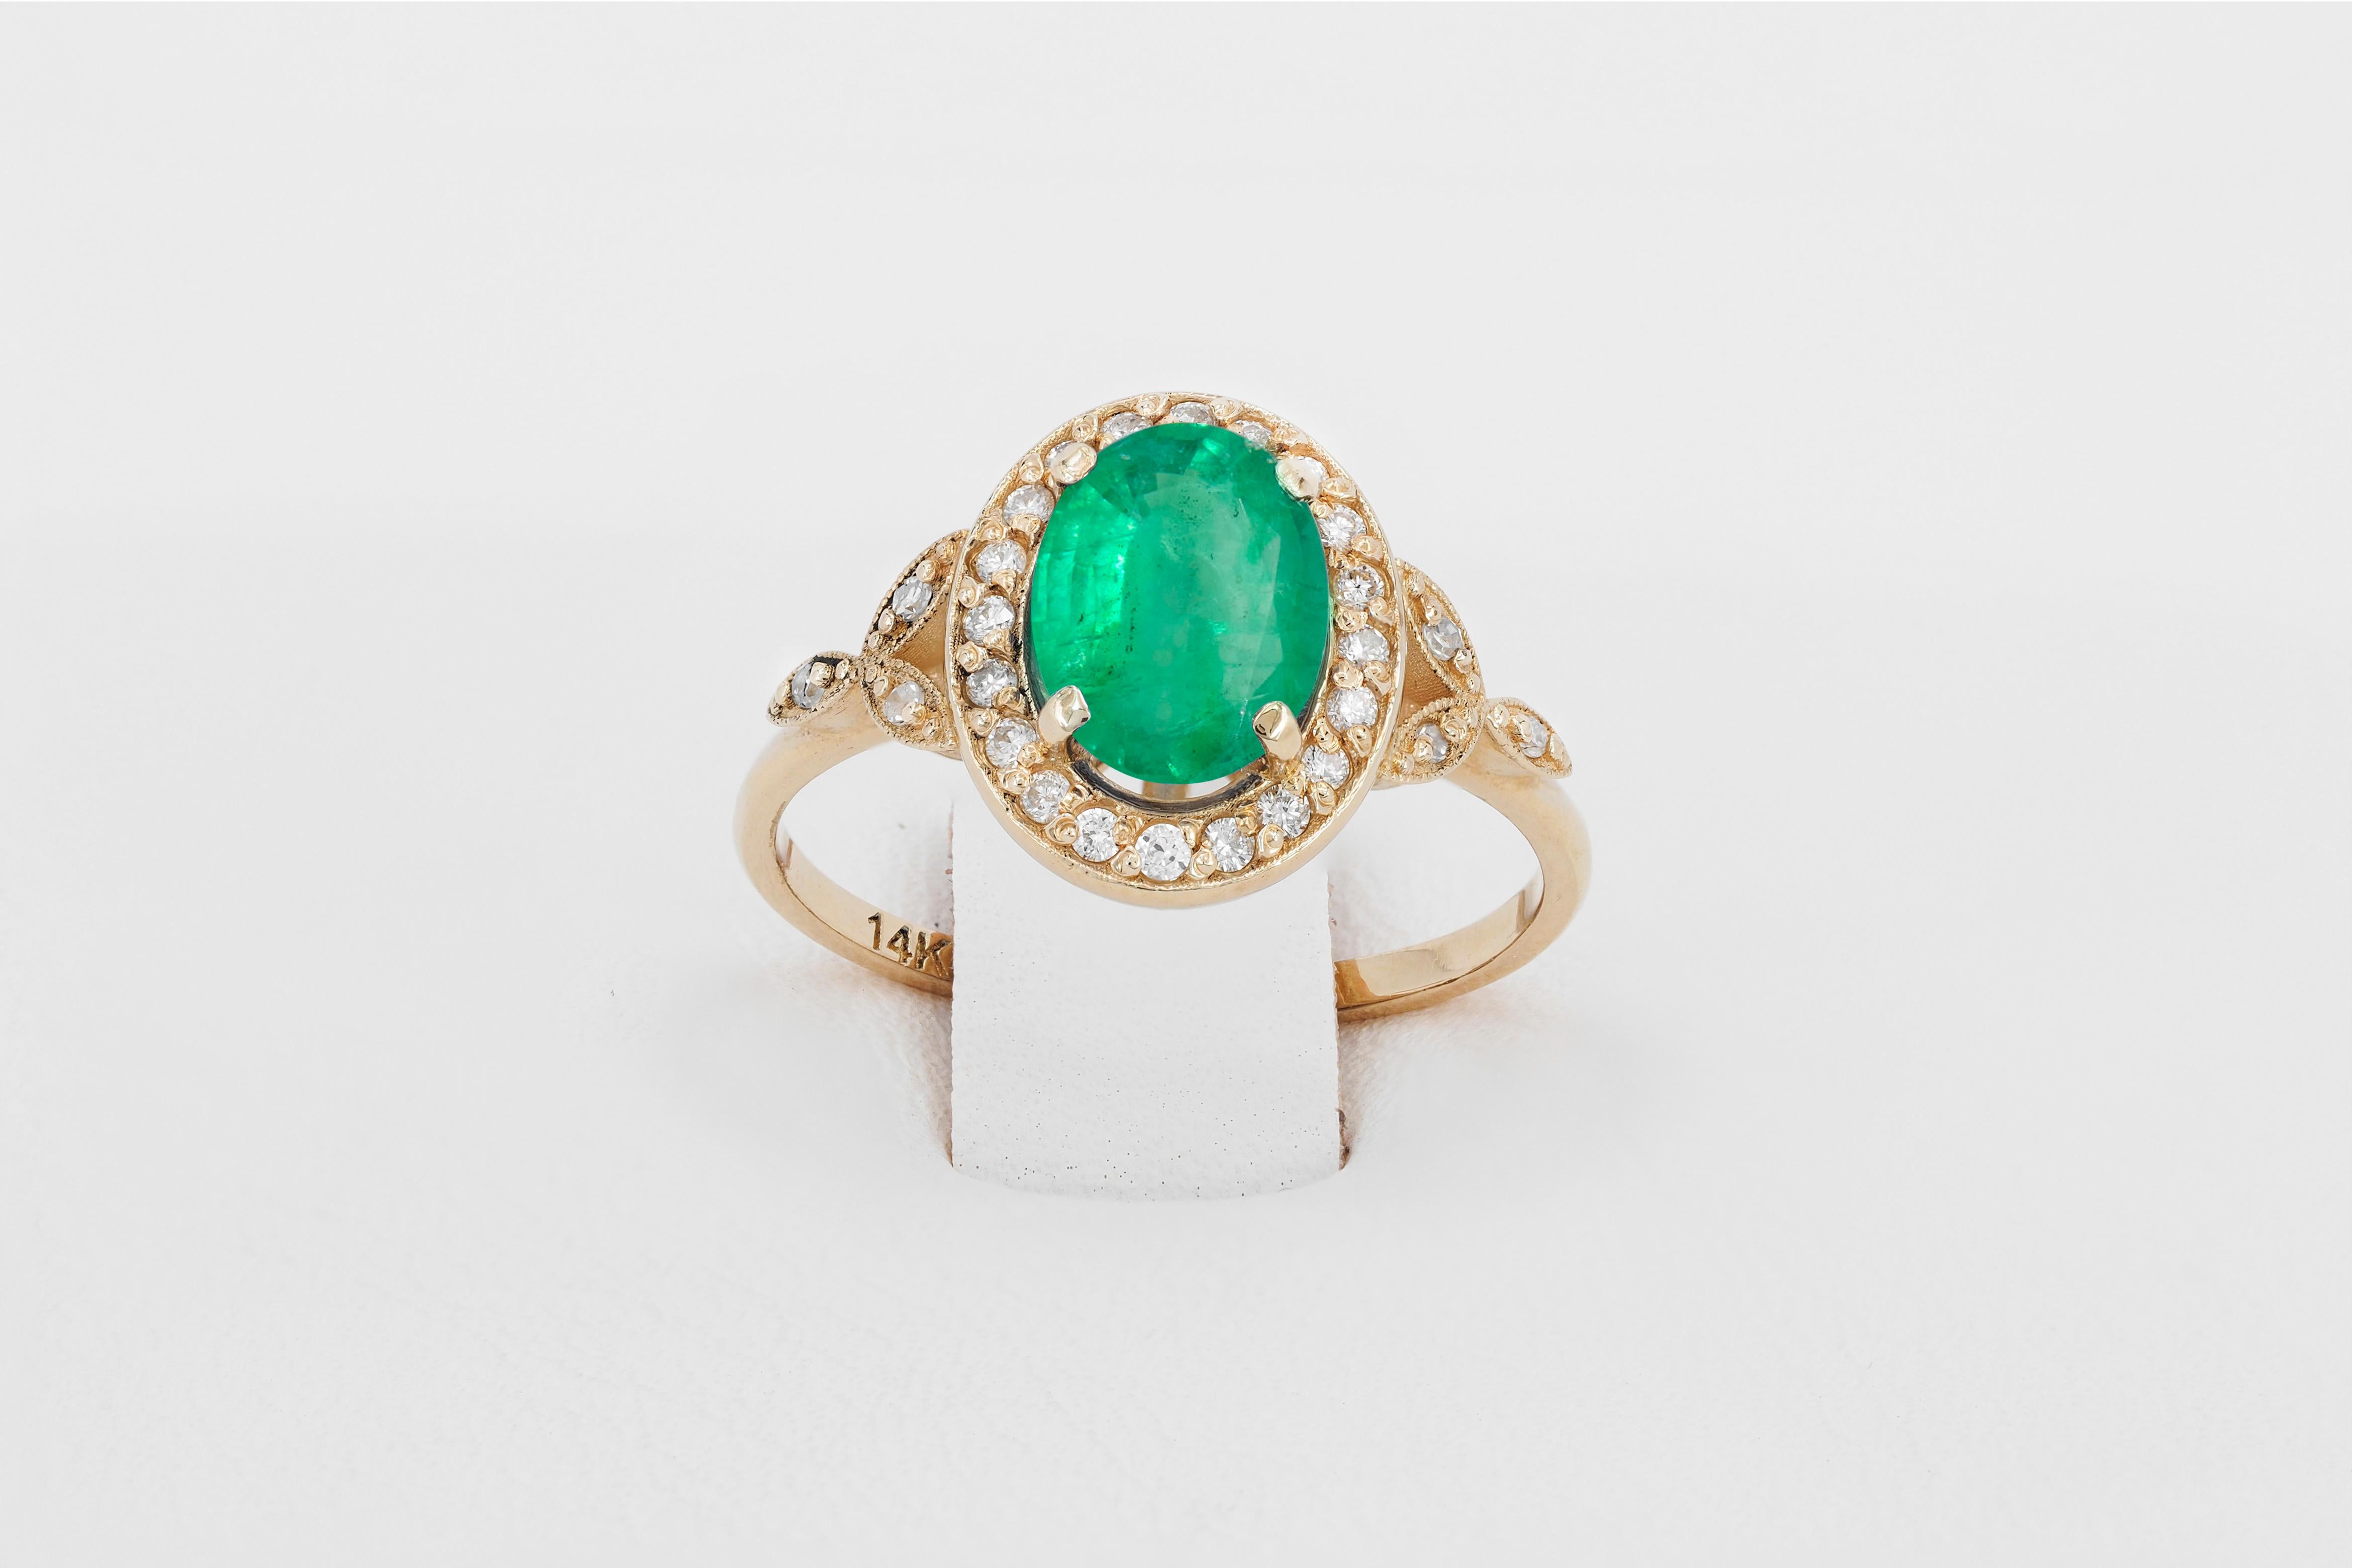 For Sale:  Emerald vintage style gold ring. 5